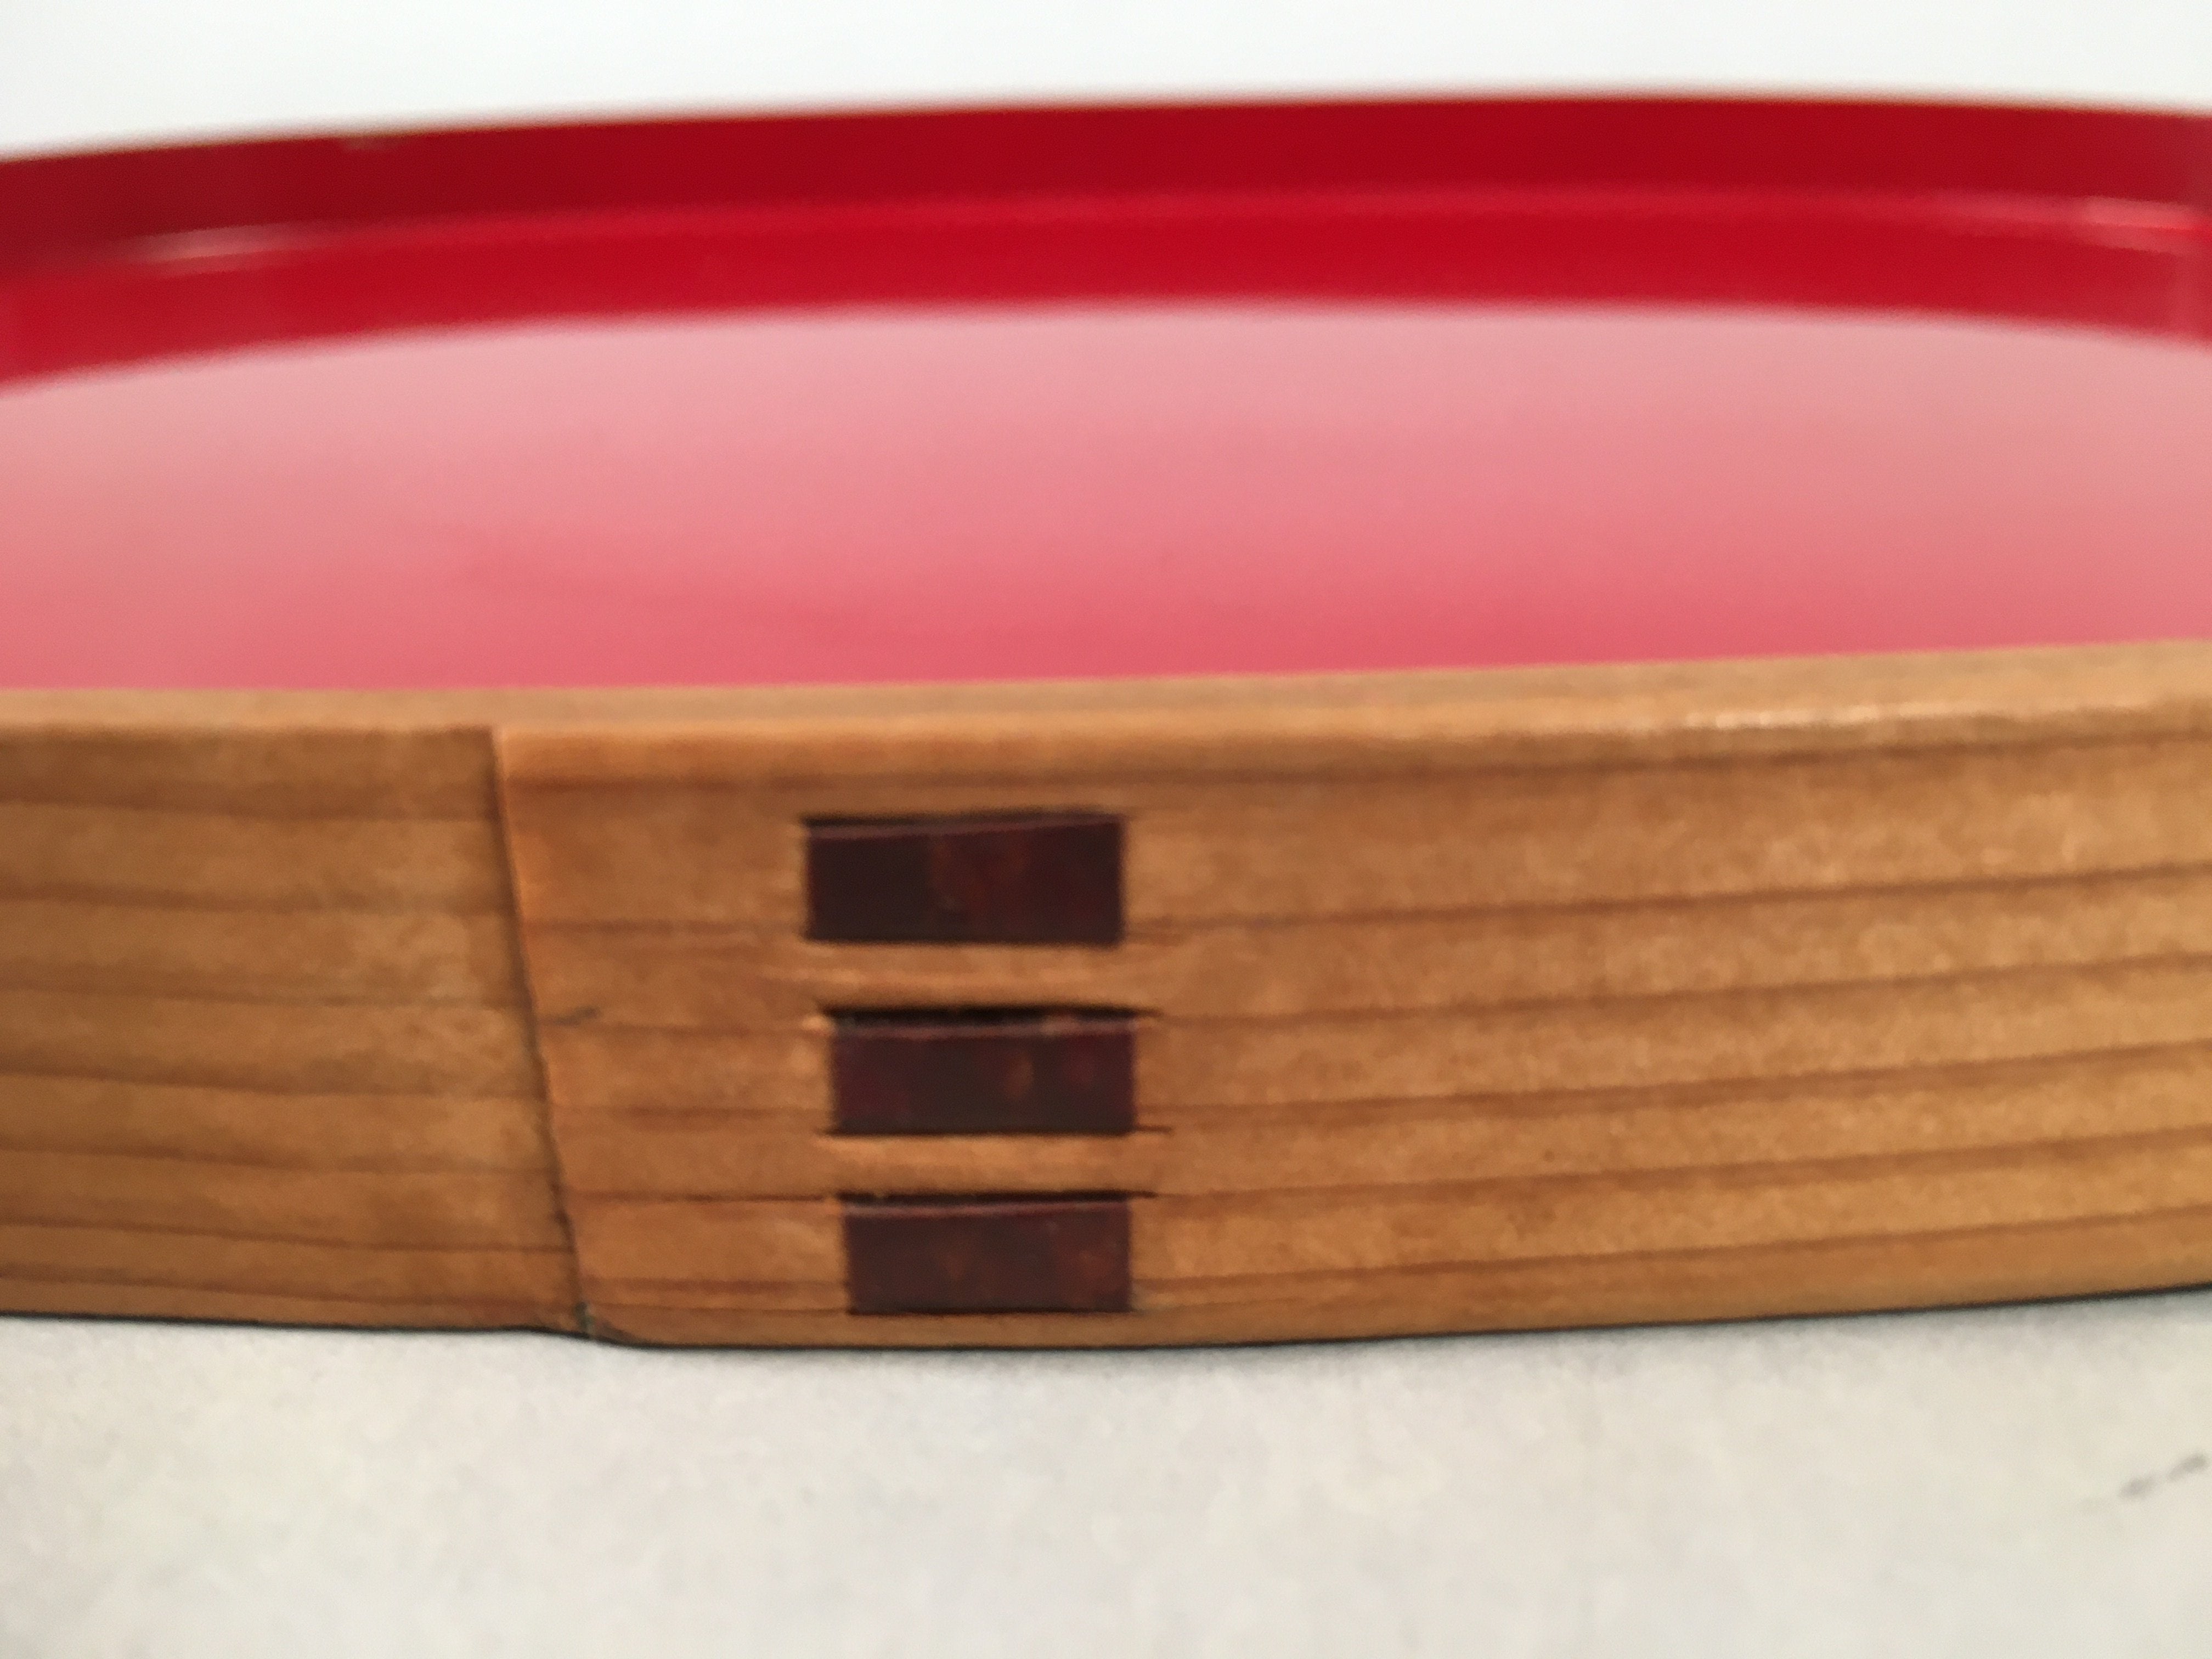 Japanese Lacquer Tray Oval Obon Vtg Wood Bamboo Rim Red Black Nurimono UR467